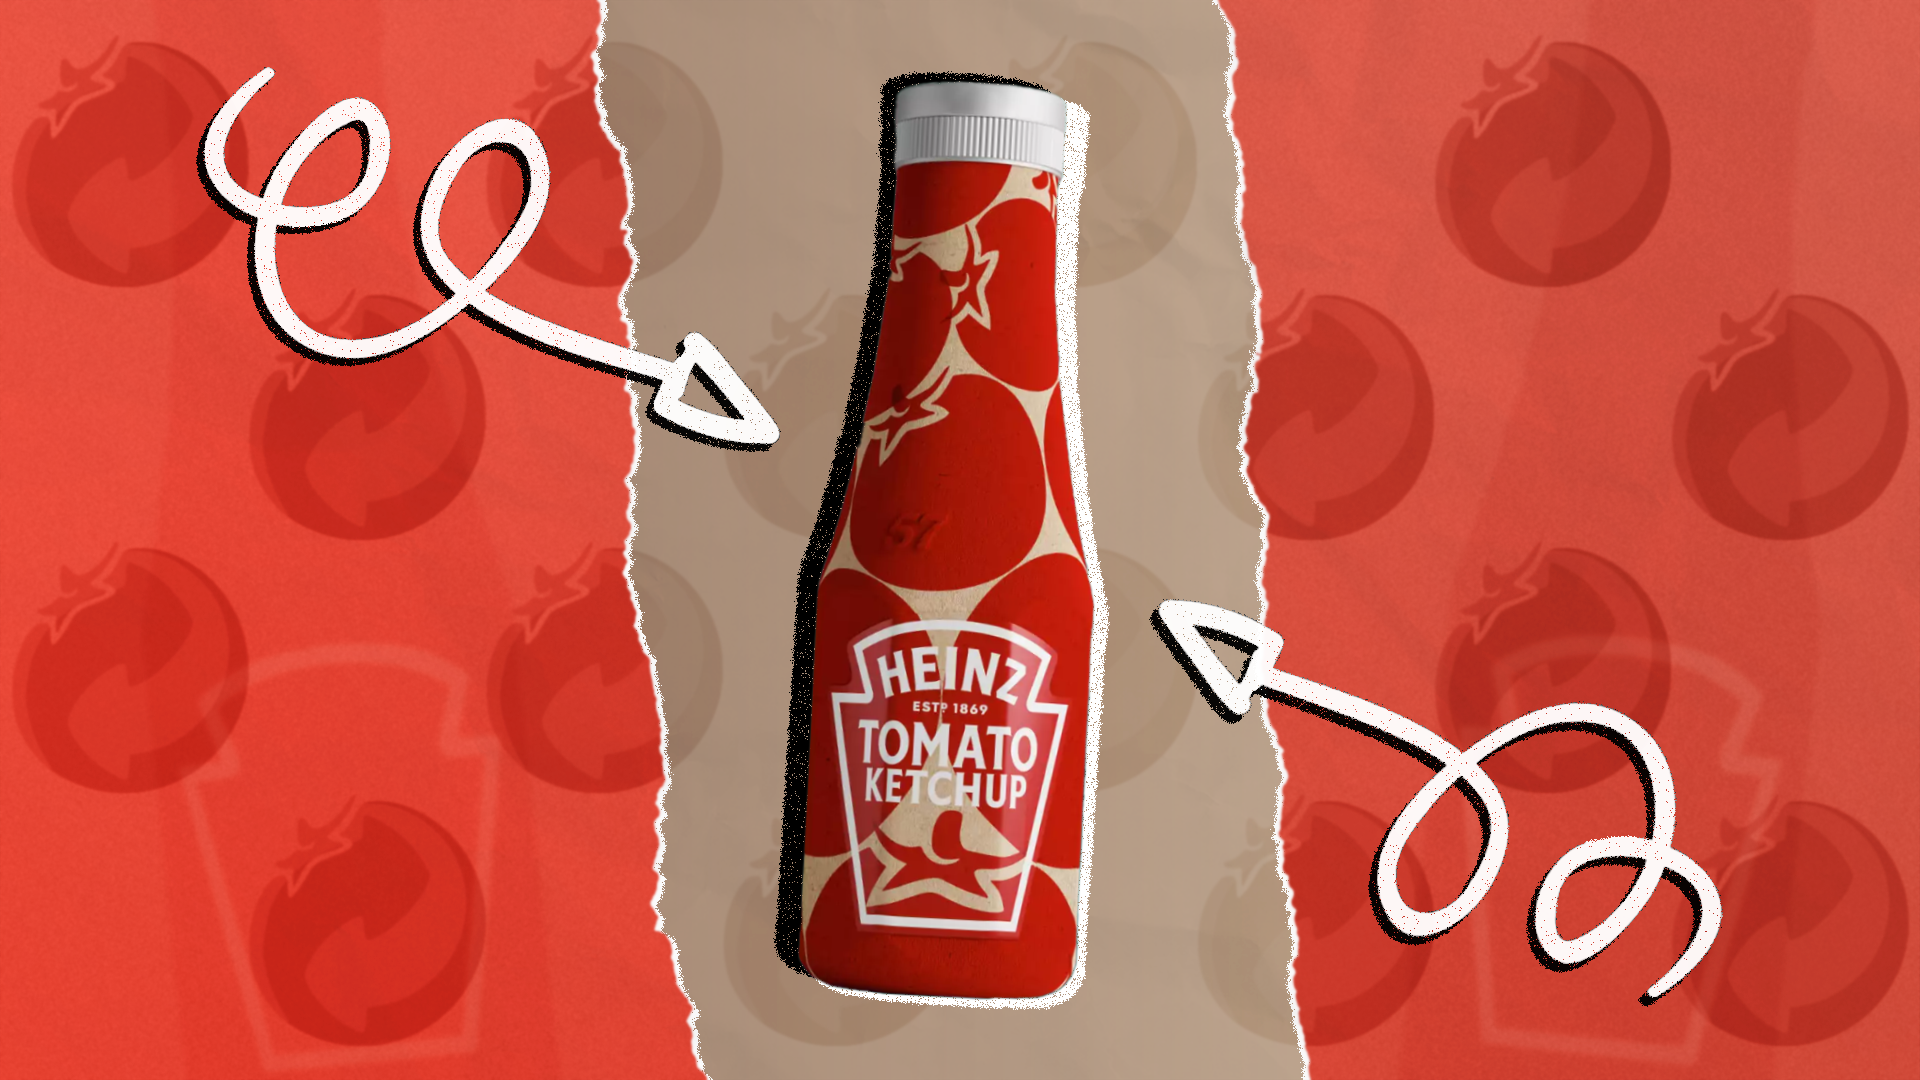 Heinz announces plans to make sustainable paper ketchup bottles